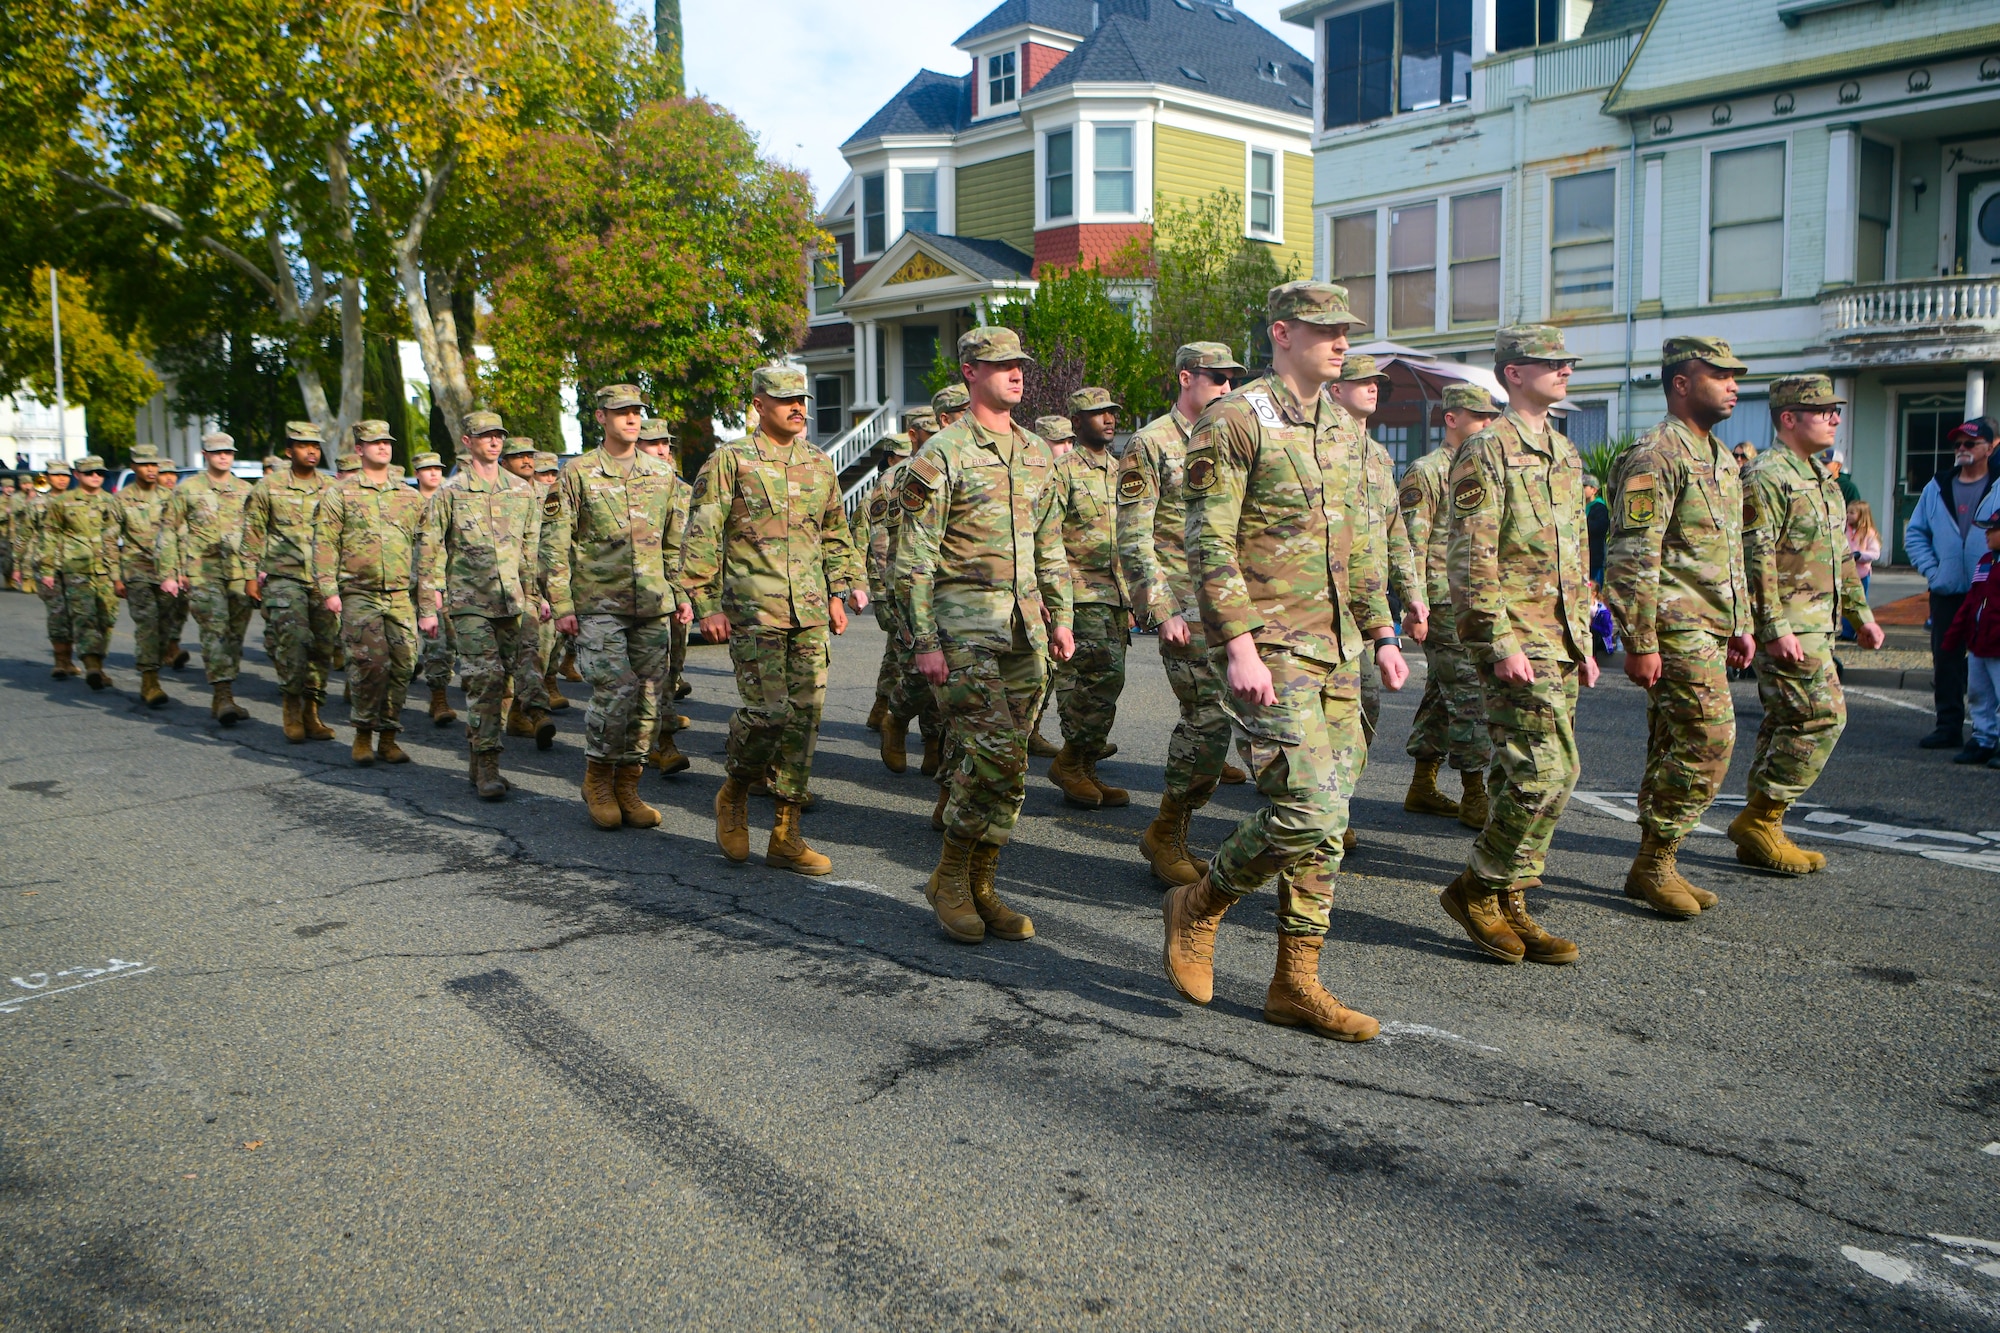 Members from Beale Air Force Base march in a Veterans Day parade in Marysville, Calif., on Nov. 11, 2022.